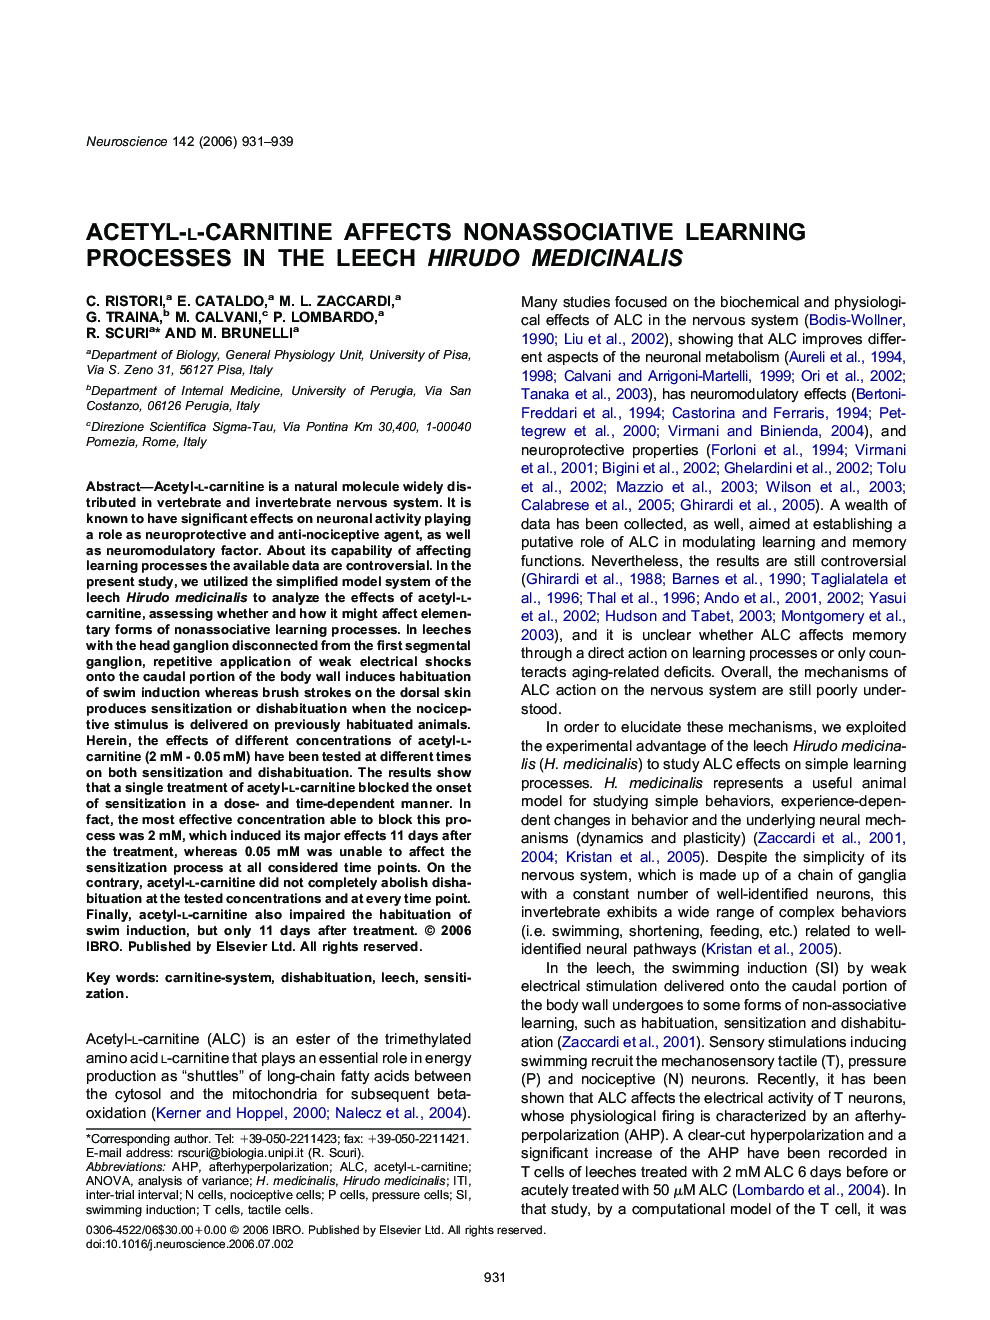 Acetyl-l-carnitine affects nonassociative learning processes in the leech Hirudo medicinalis